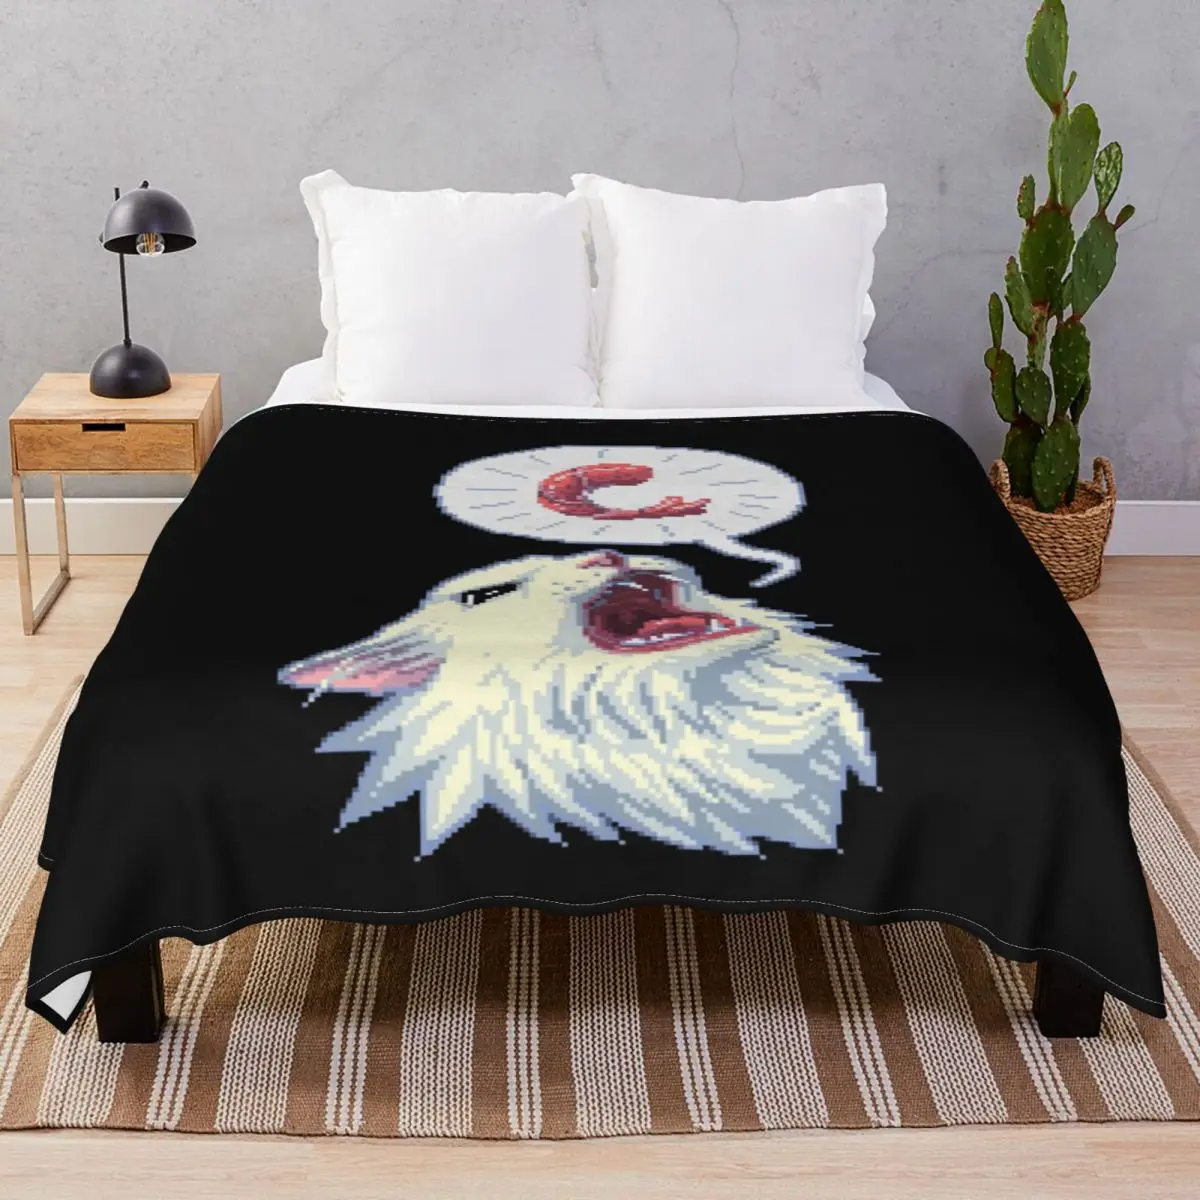 Shrimpin Thurston The Cat Blankets Fleece Spring Autumn Multifunction Throw Blanket for Bedding Home Couch Camp Office